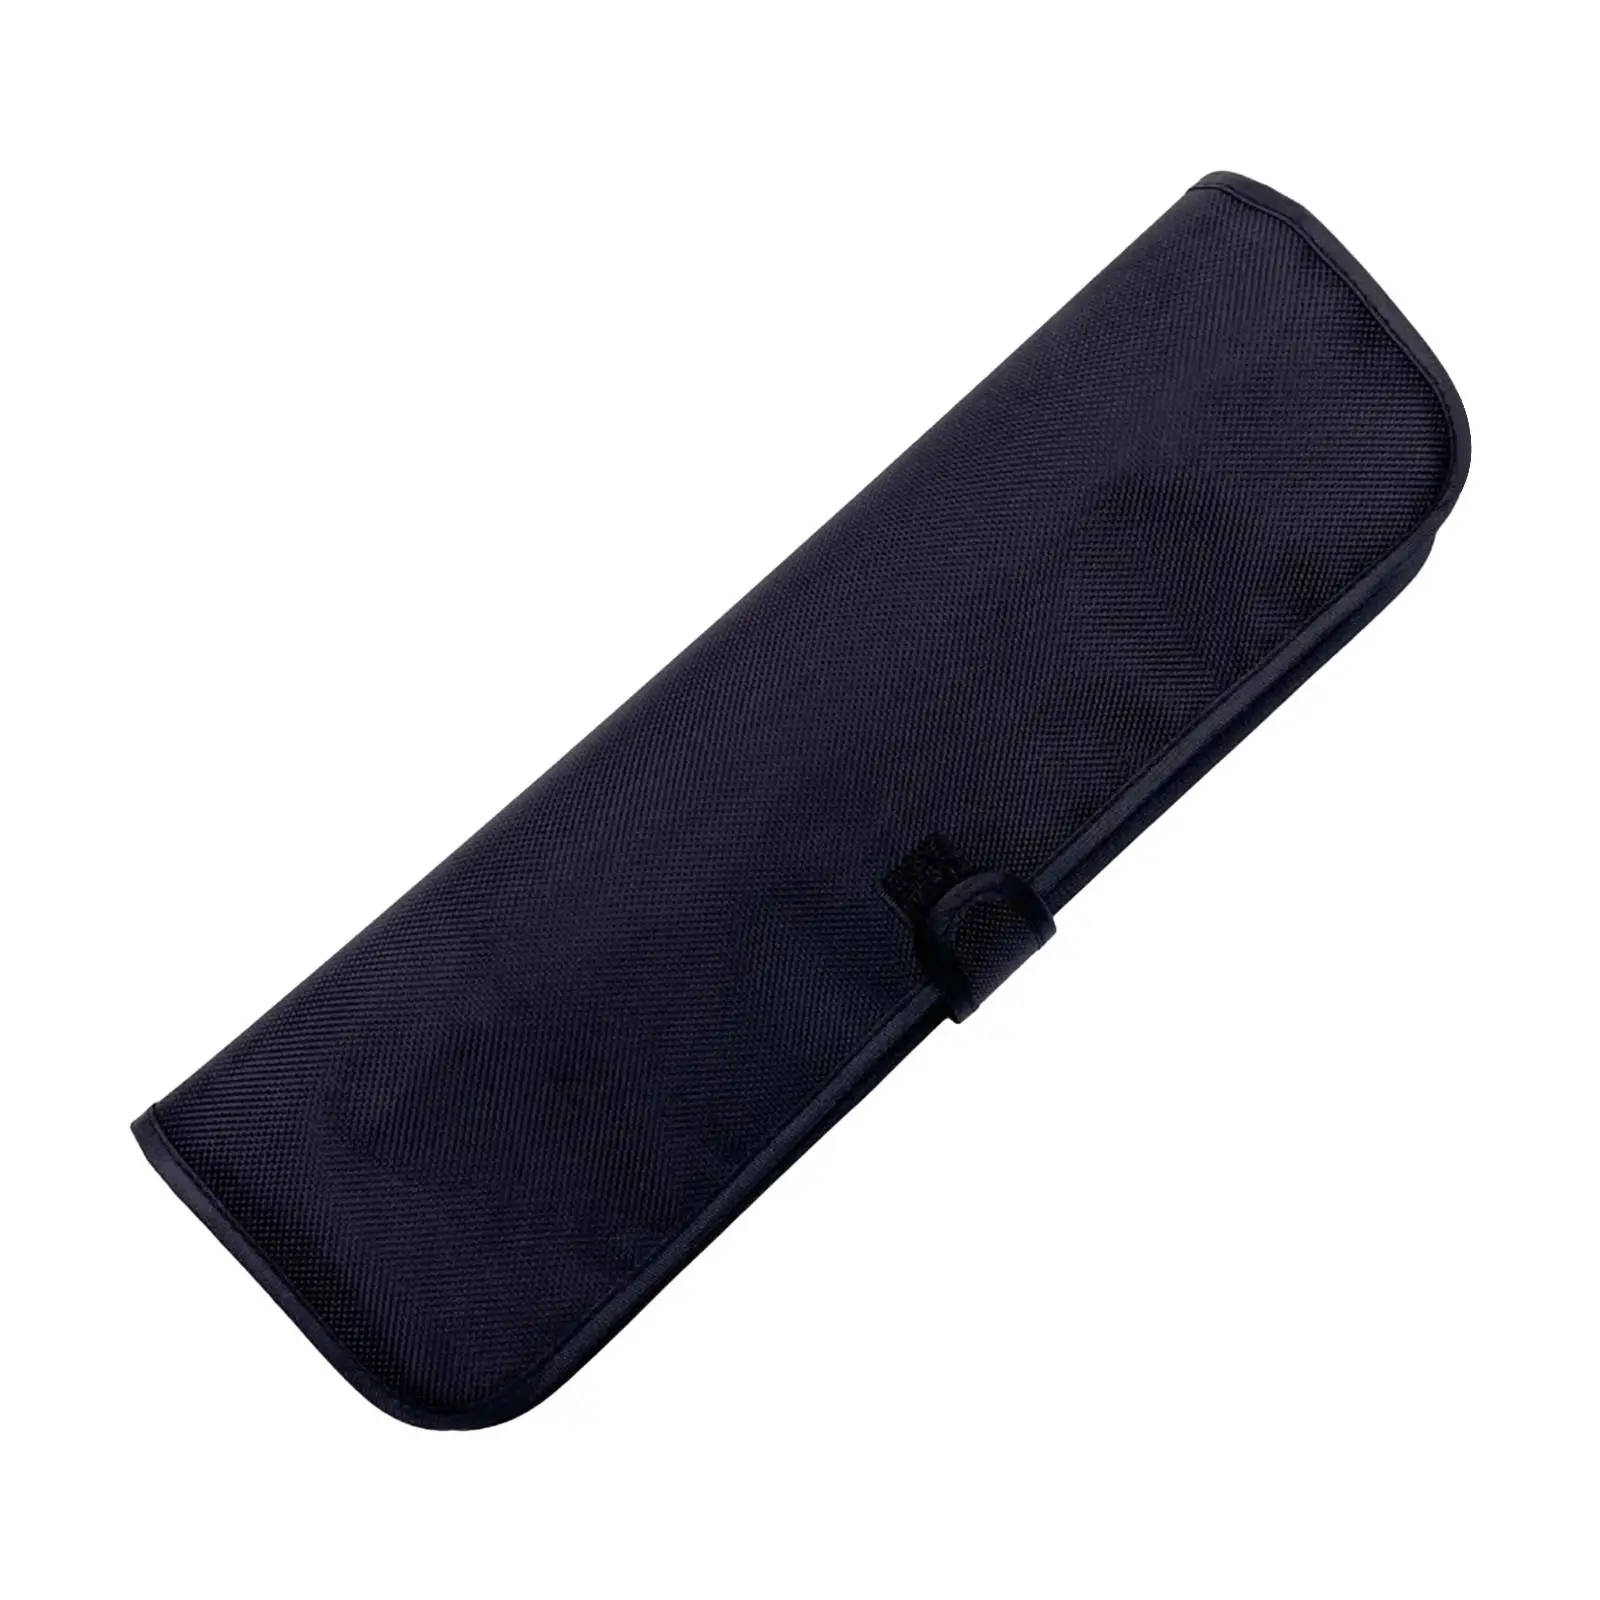 Hair Straightener Travel Case Barber Hairdressing Tools, Multipurpose Oxford Cloth Curling Iron Cover Sleeve for Curling Iron